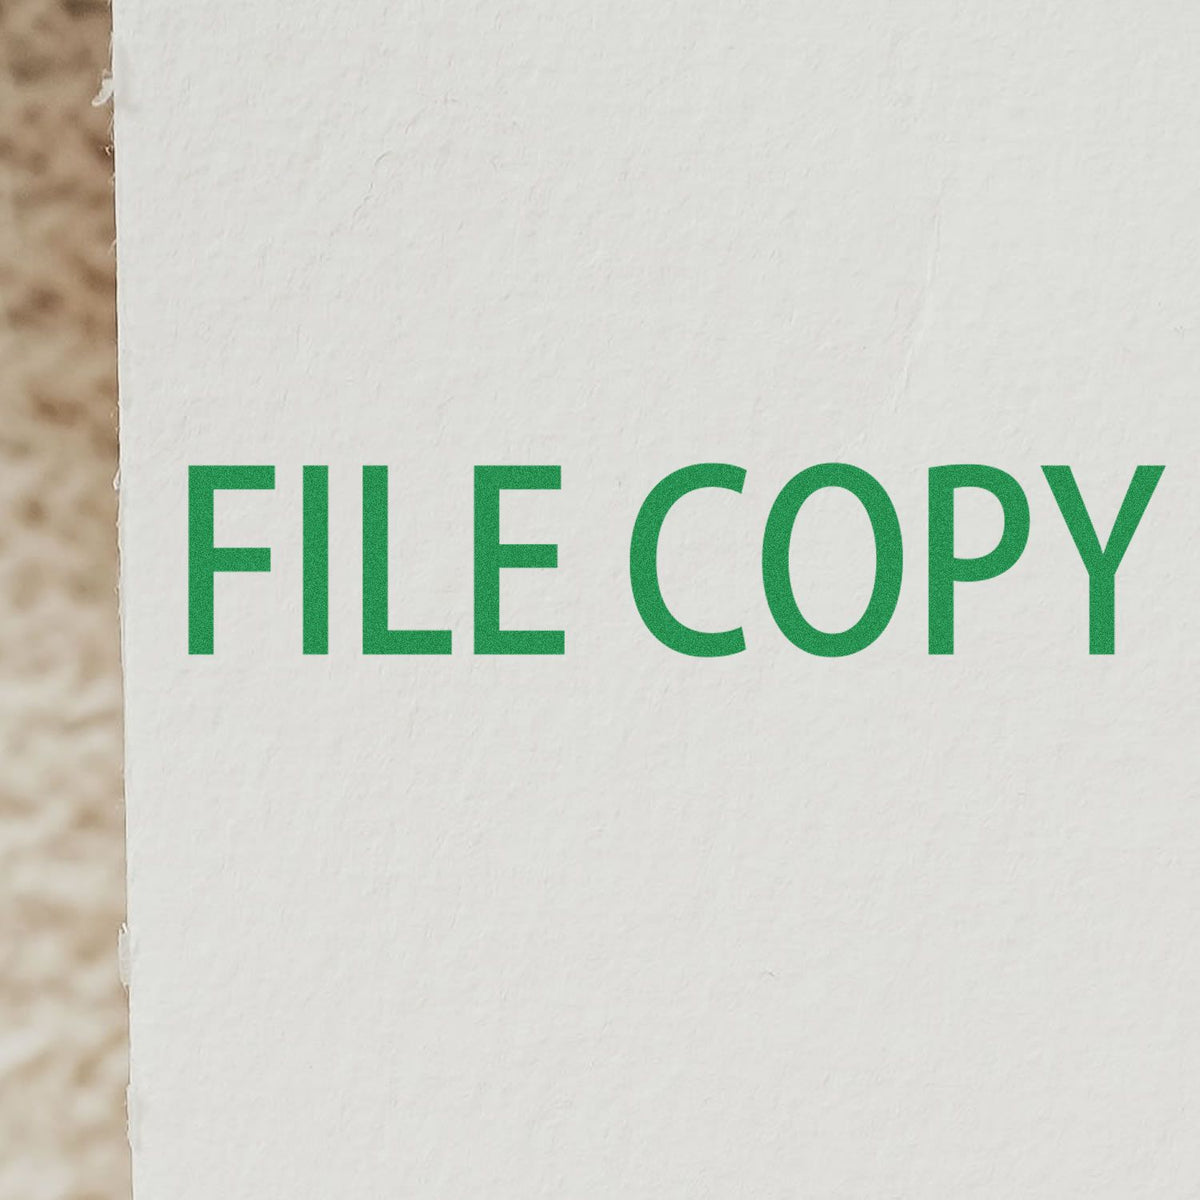 File Copy Rubber Stamp In Use